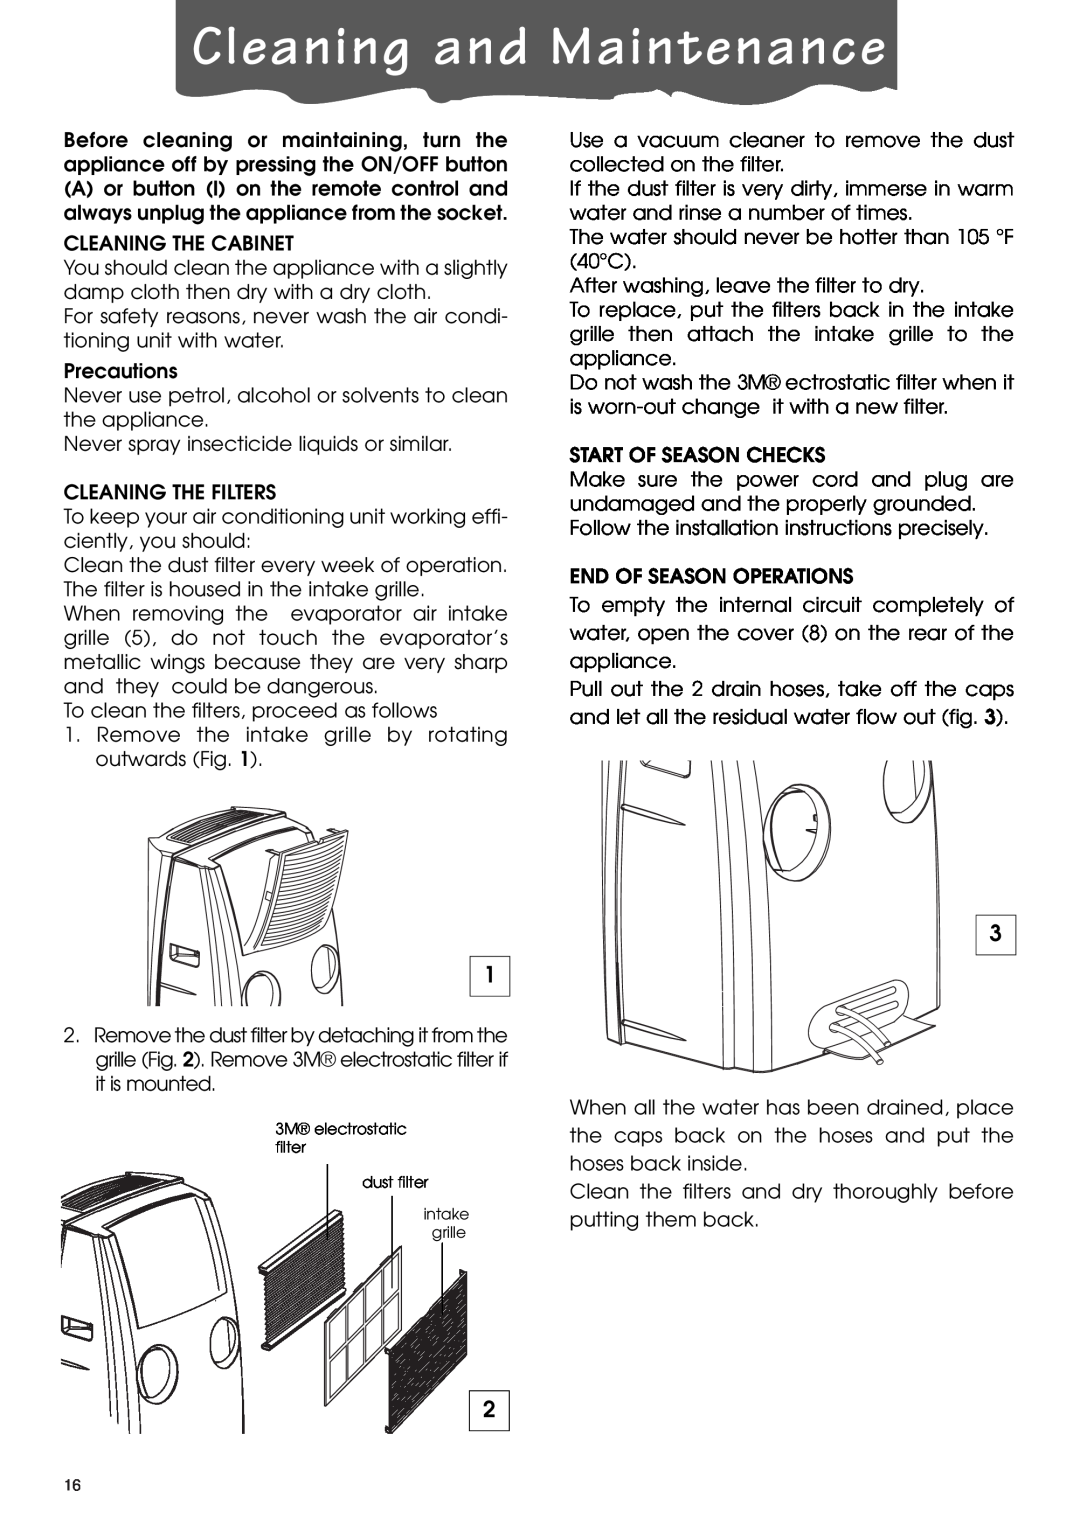 DeLonghi PACL90 specifications Cleaning and Maintenance 